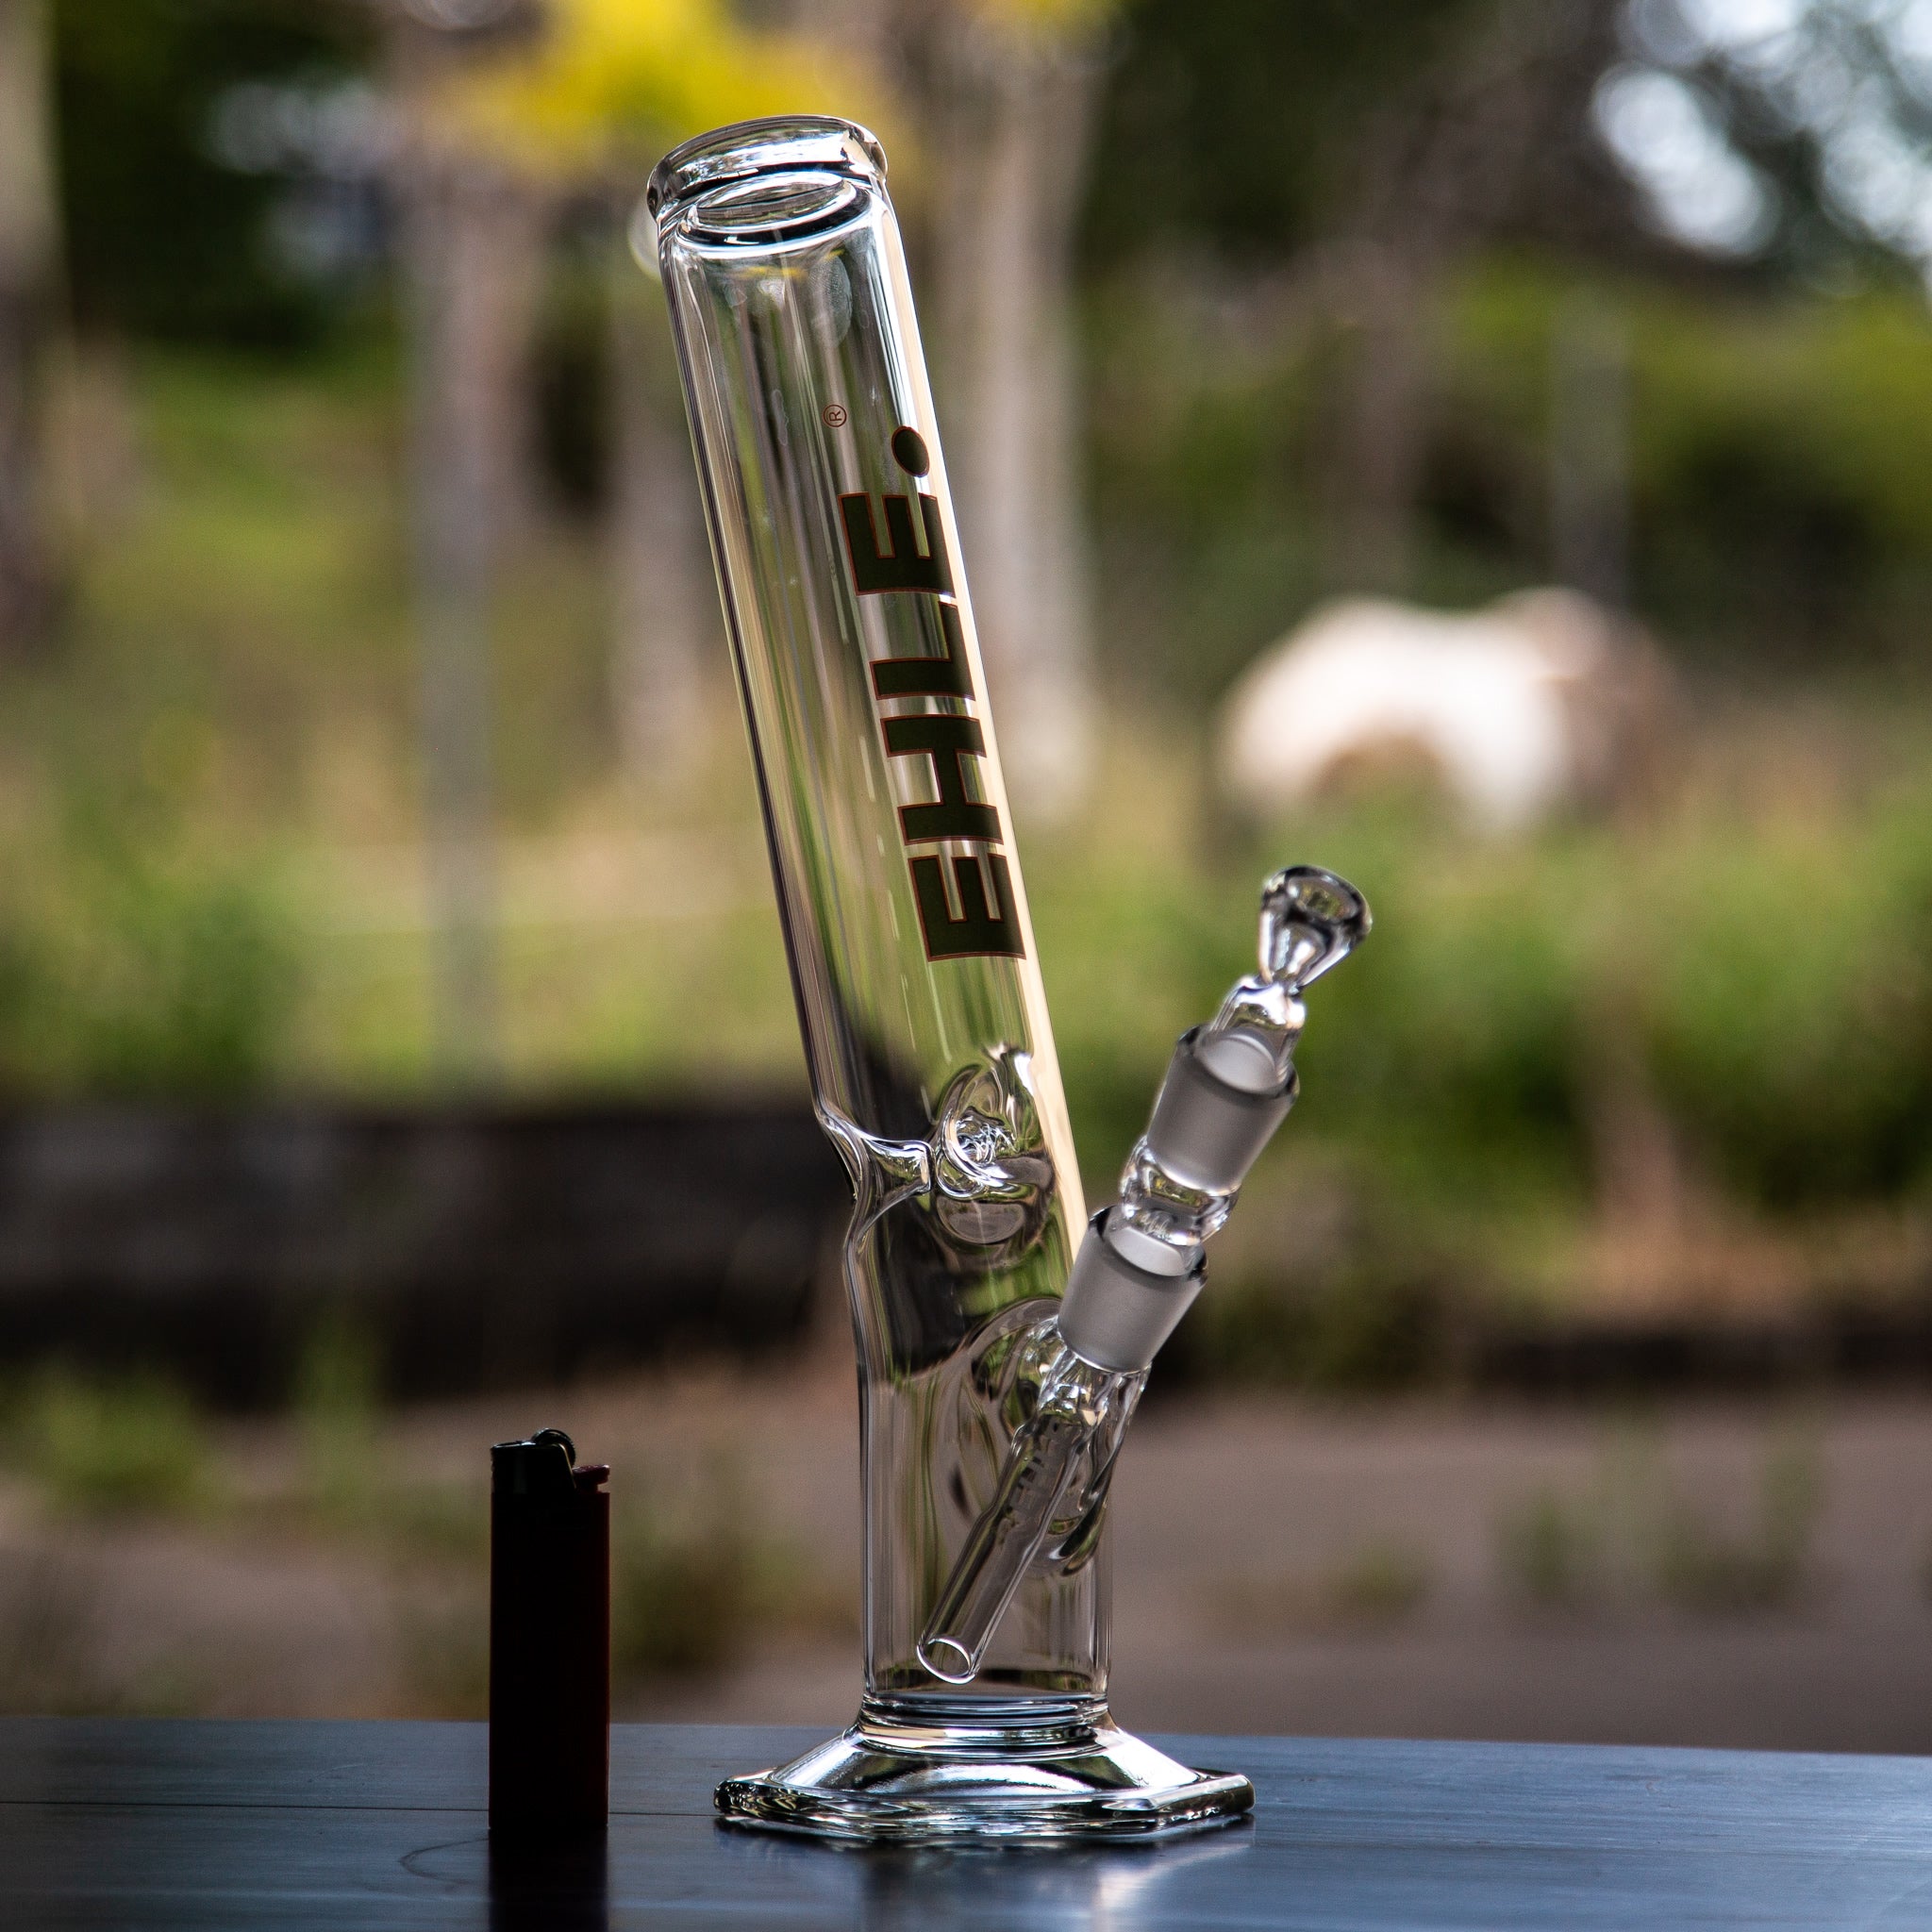 EHLE glass bongs and smoking accessories at Easybong 